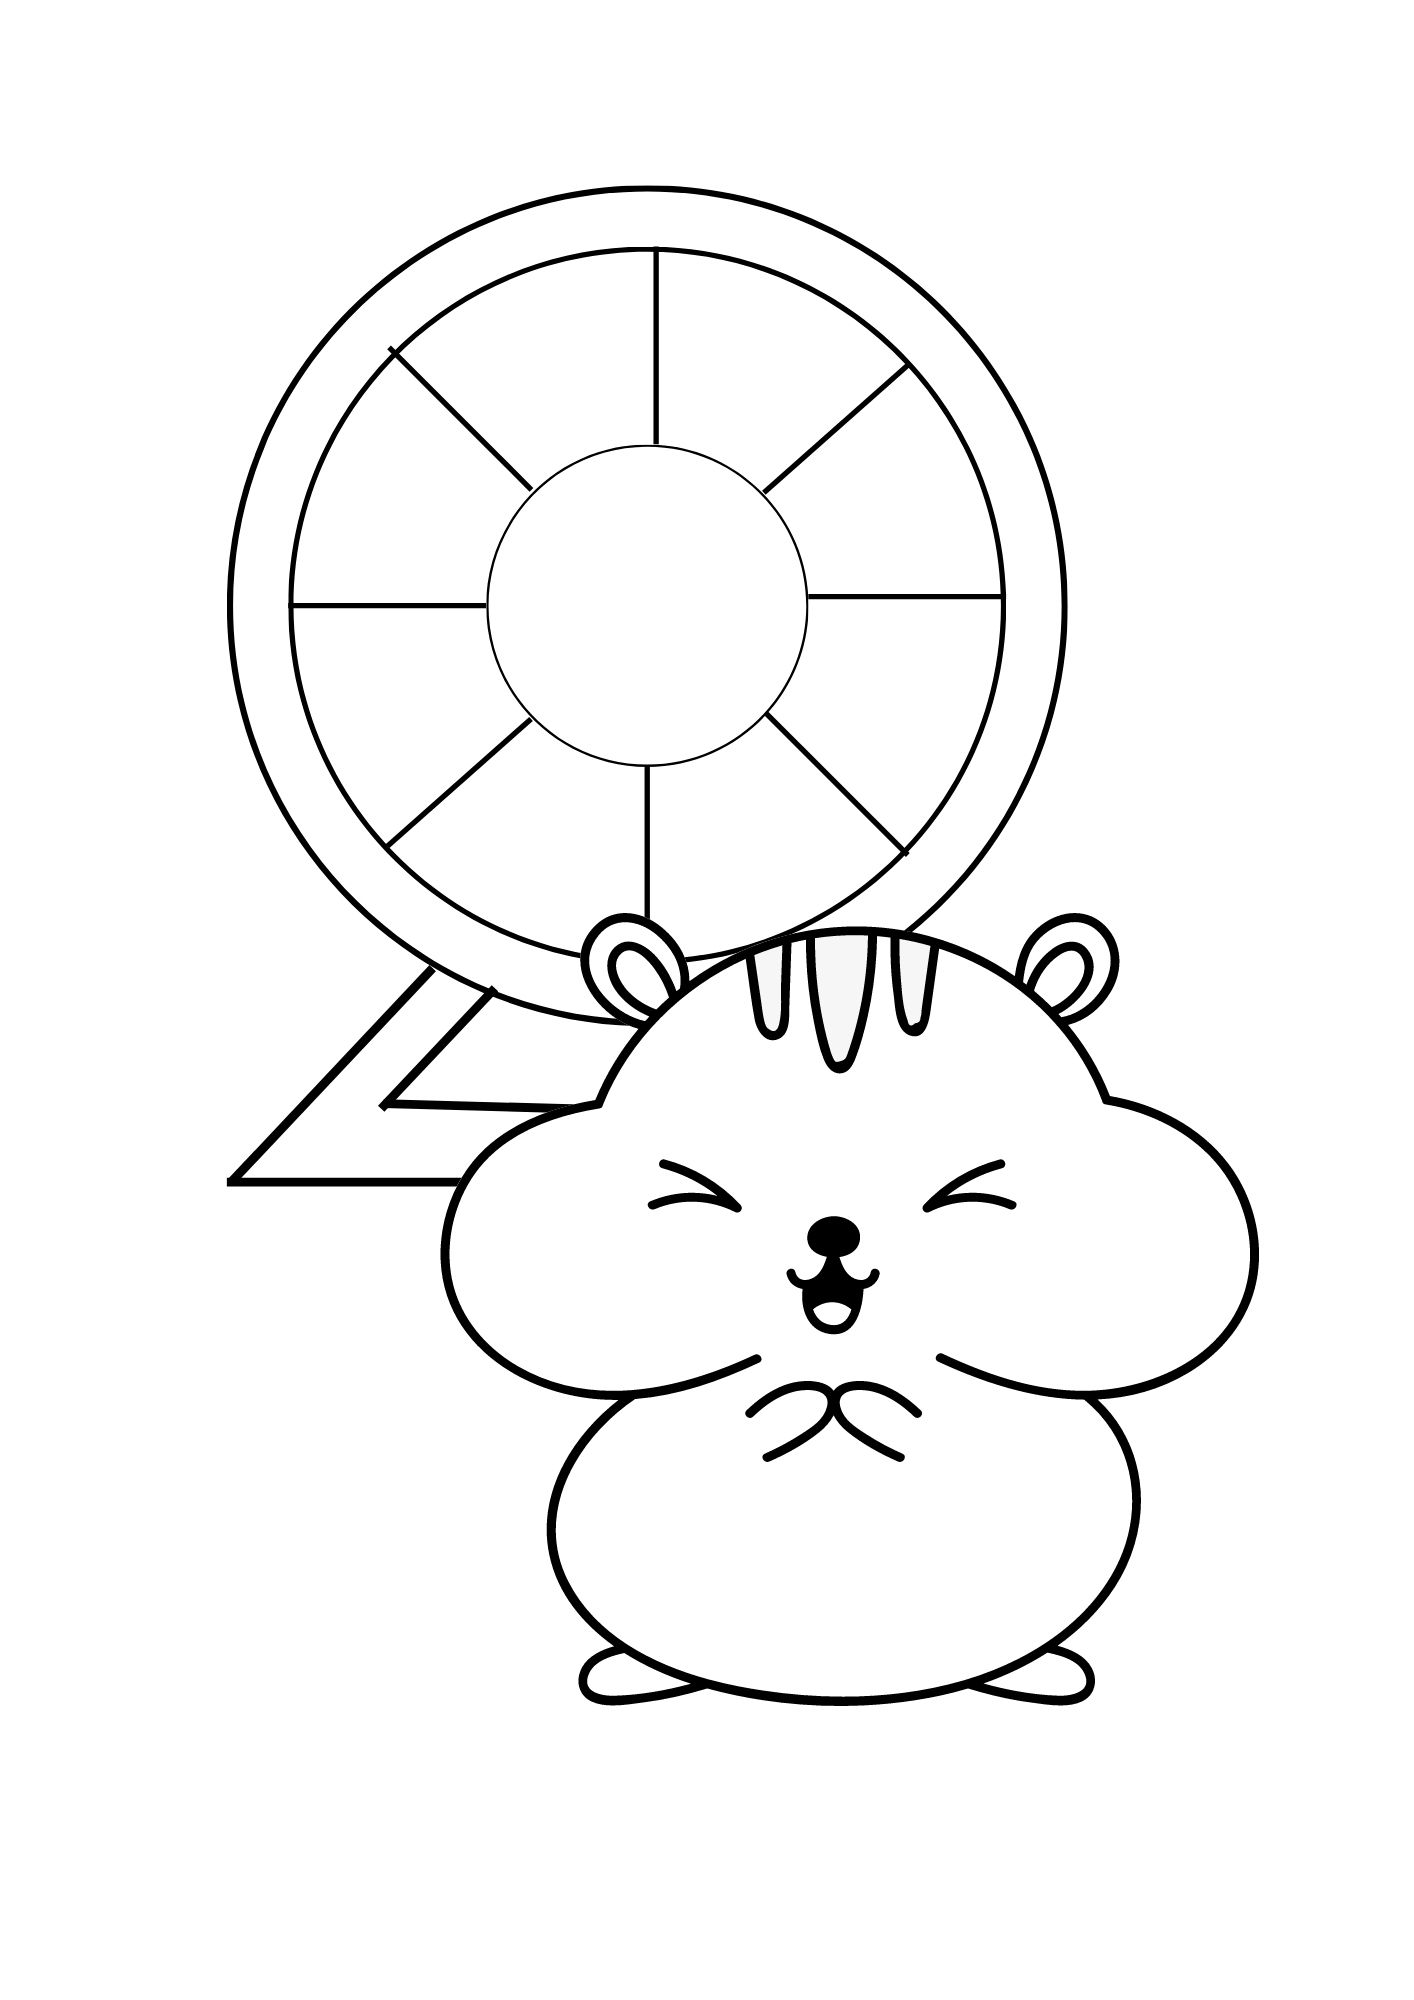 hamster in front of a hamster wheel coloring page